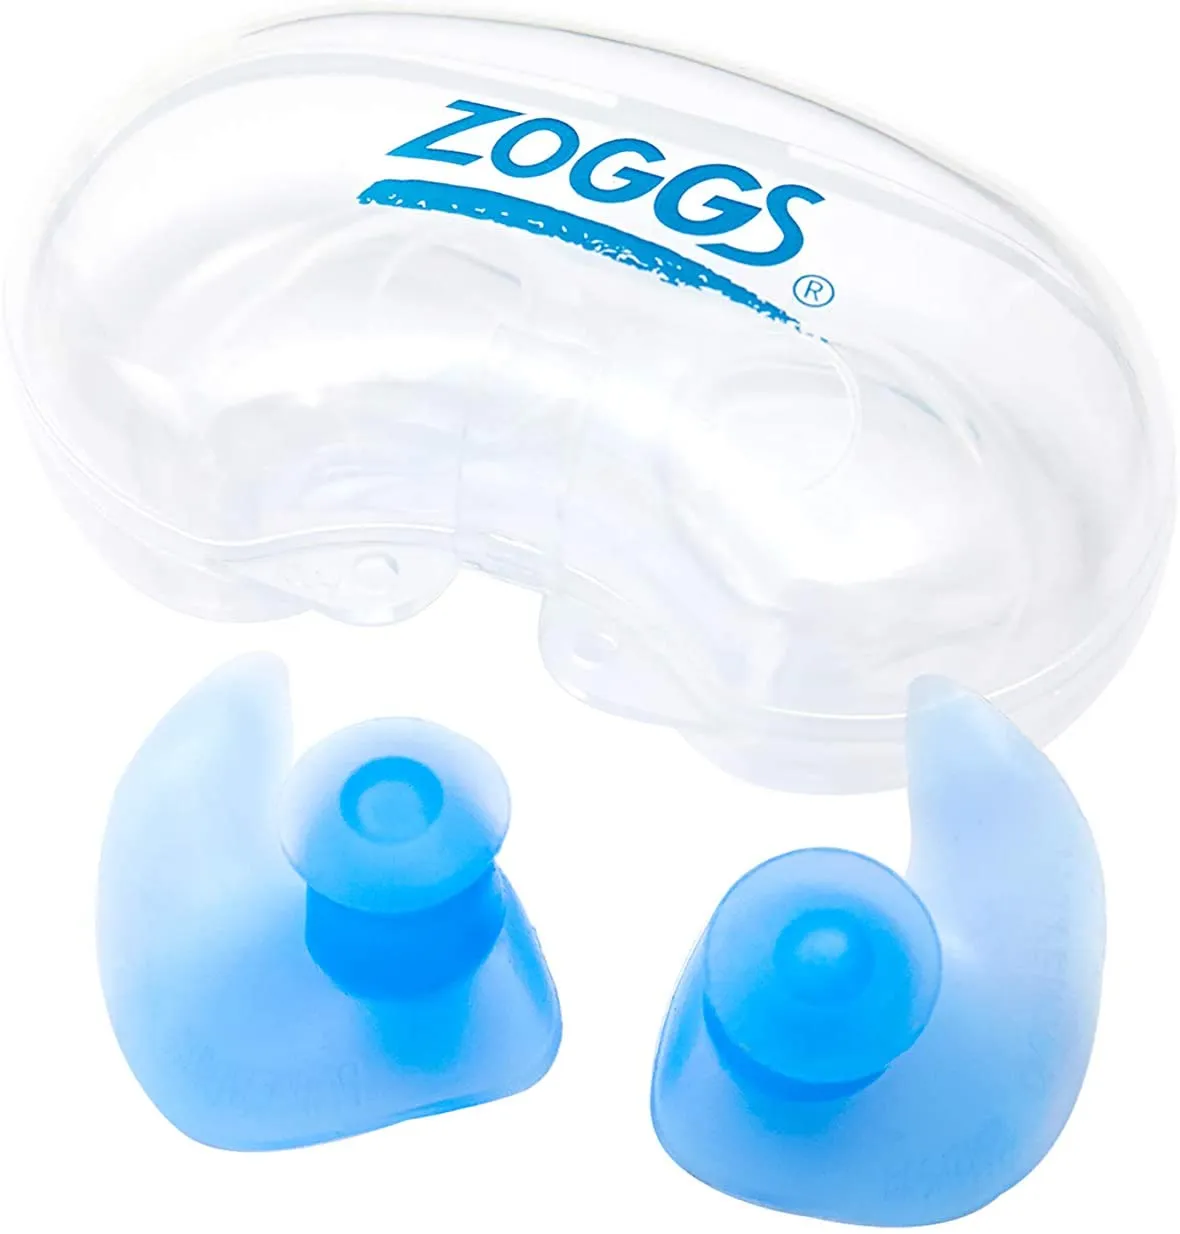 A pair of transparent and blue ear plugs on a white background.